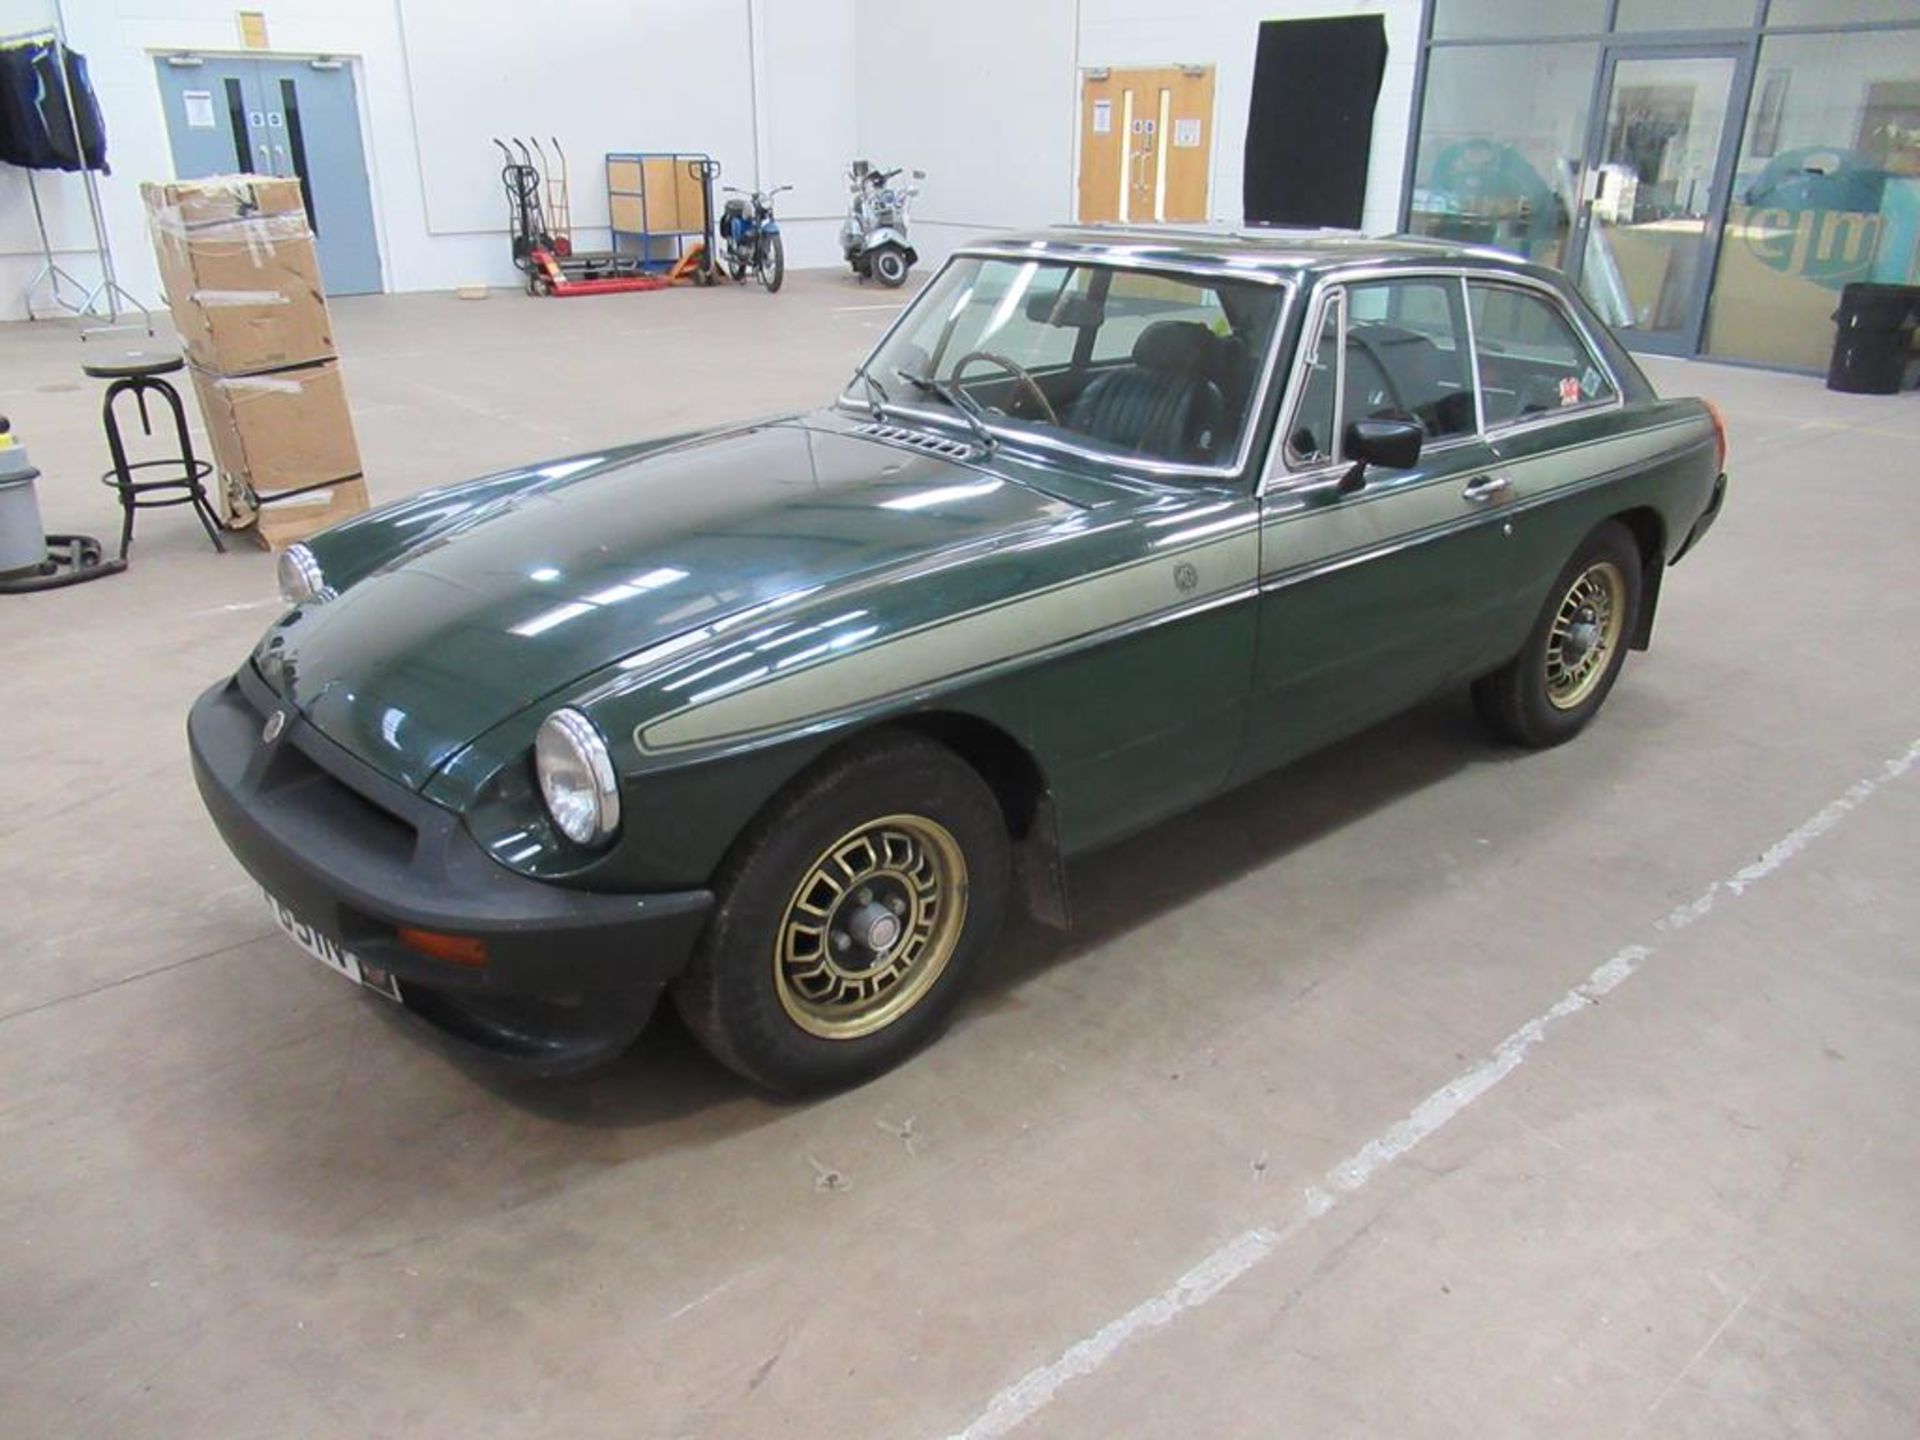 50th Anniversary Edition MG B GT - first registered 1975 - Image 2 of 33